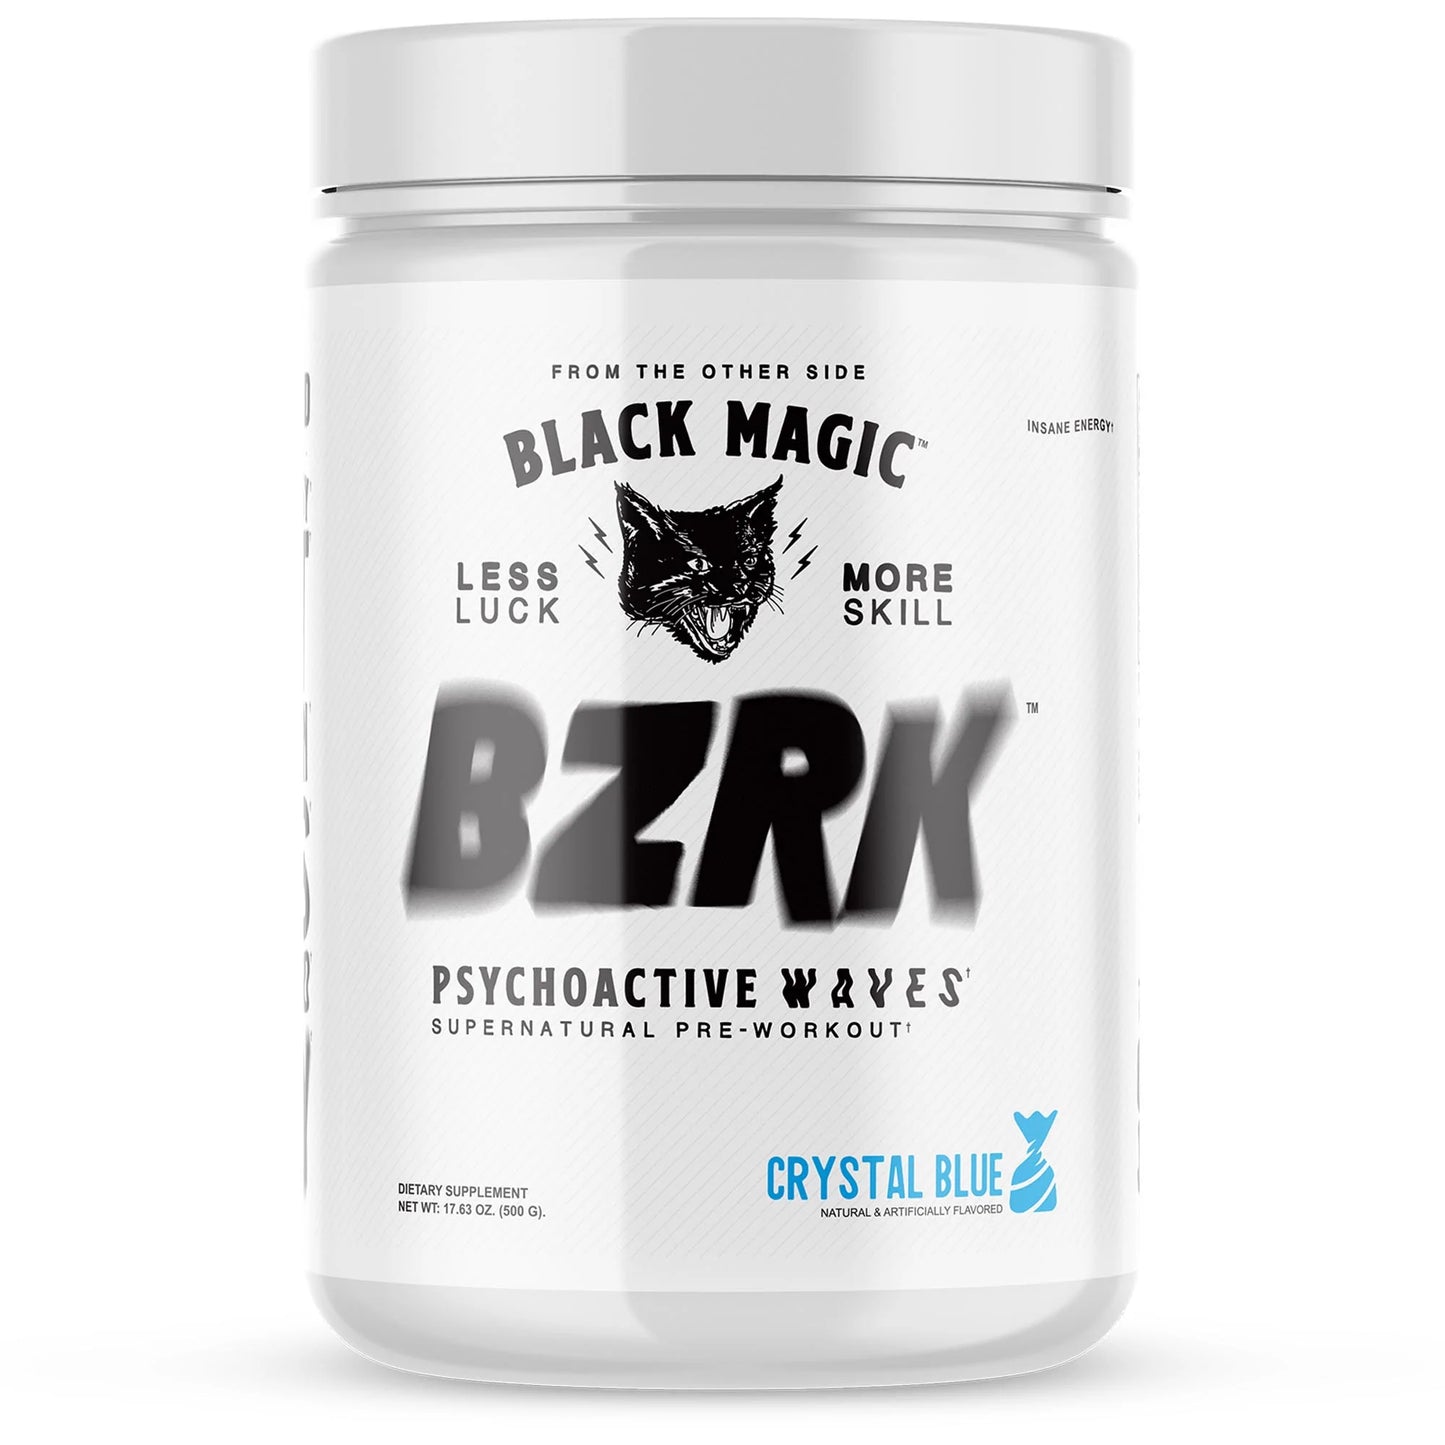 Black Magic BZRK Supplement Container Crystal Blue